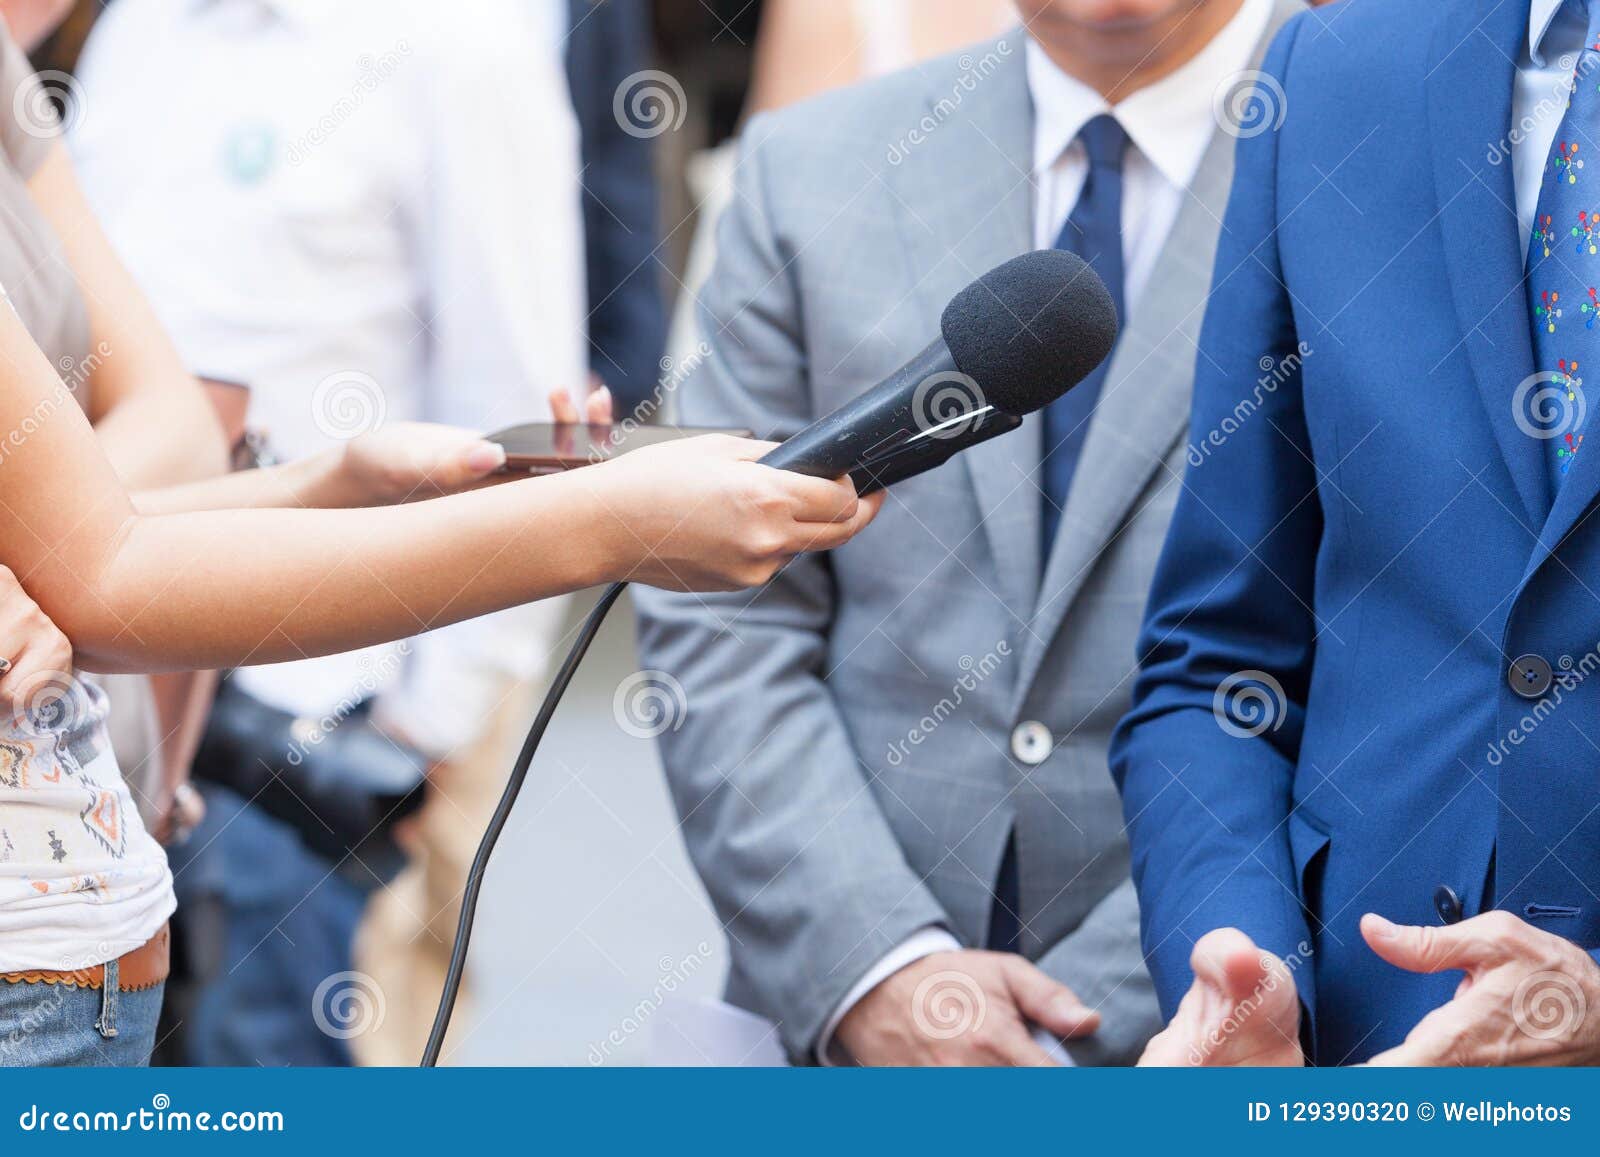 Journalists Making Media Interview With Business Person Or Politician